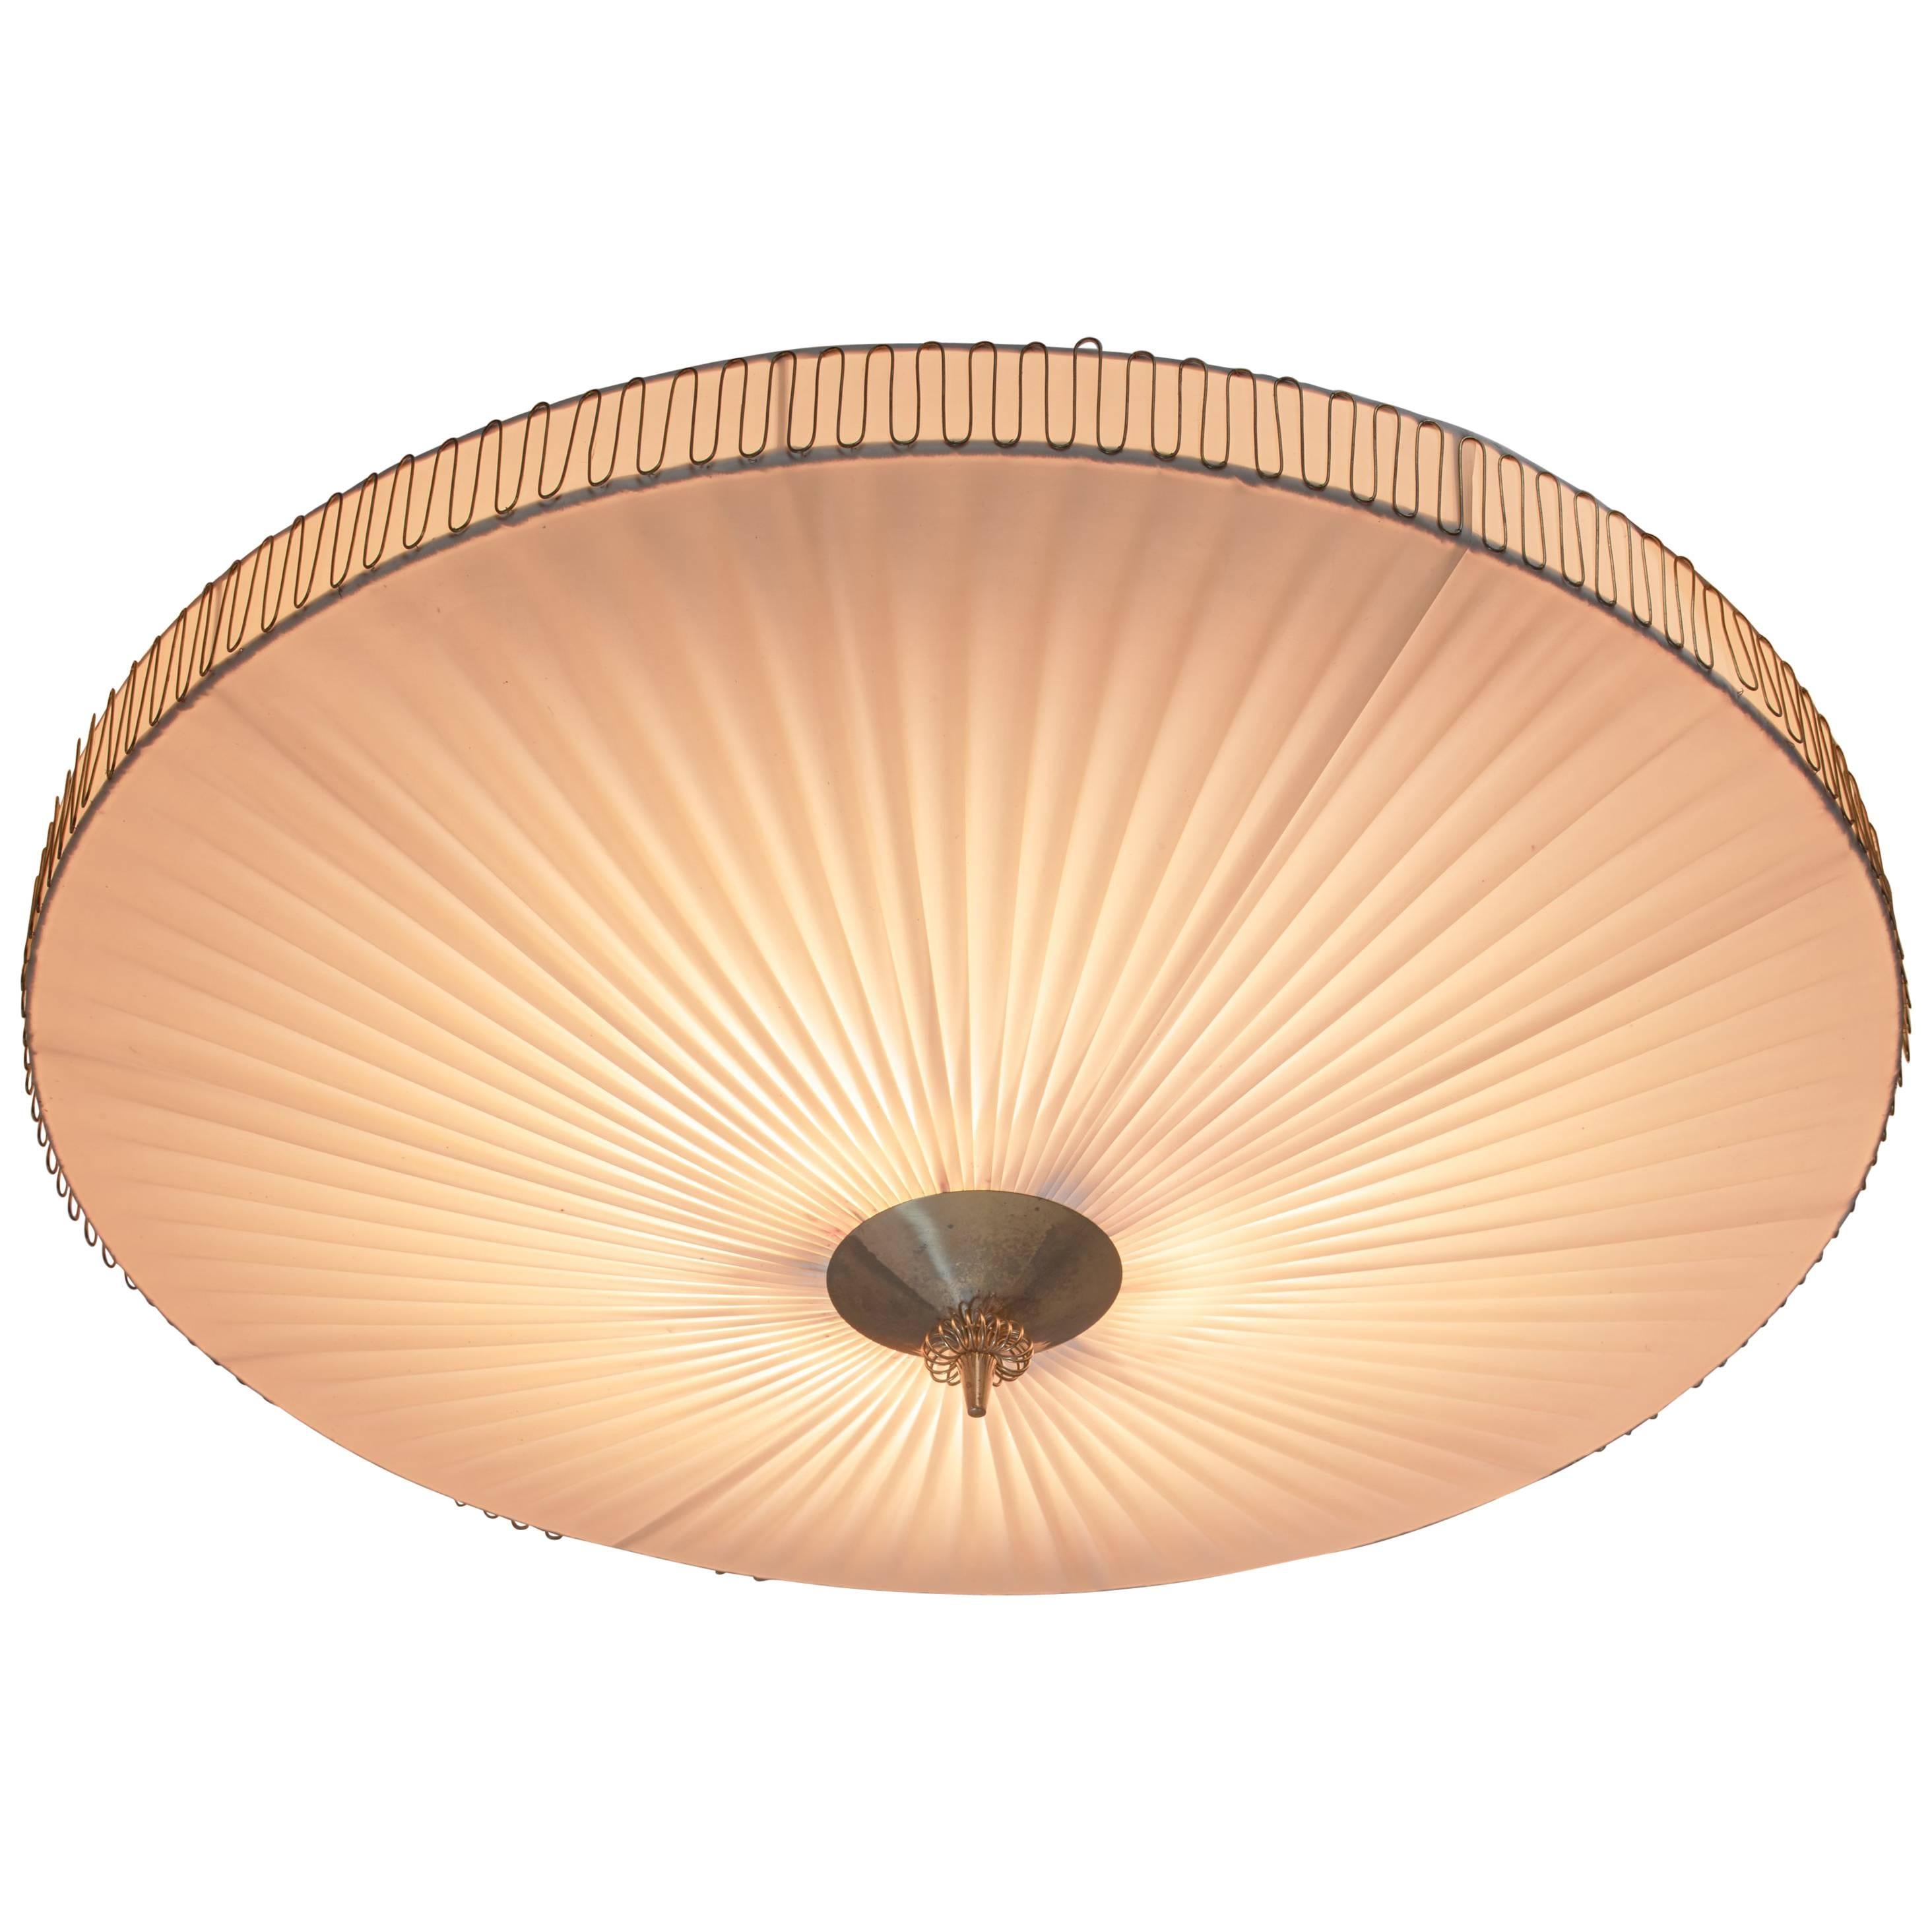 Large Round Pleated Flush Mount with Brass Centrepart by Idman, Finland, 1950s